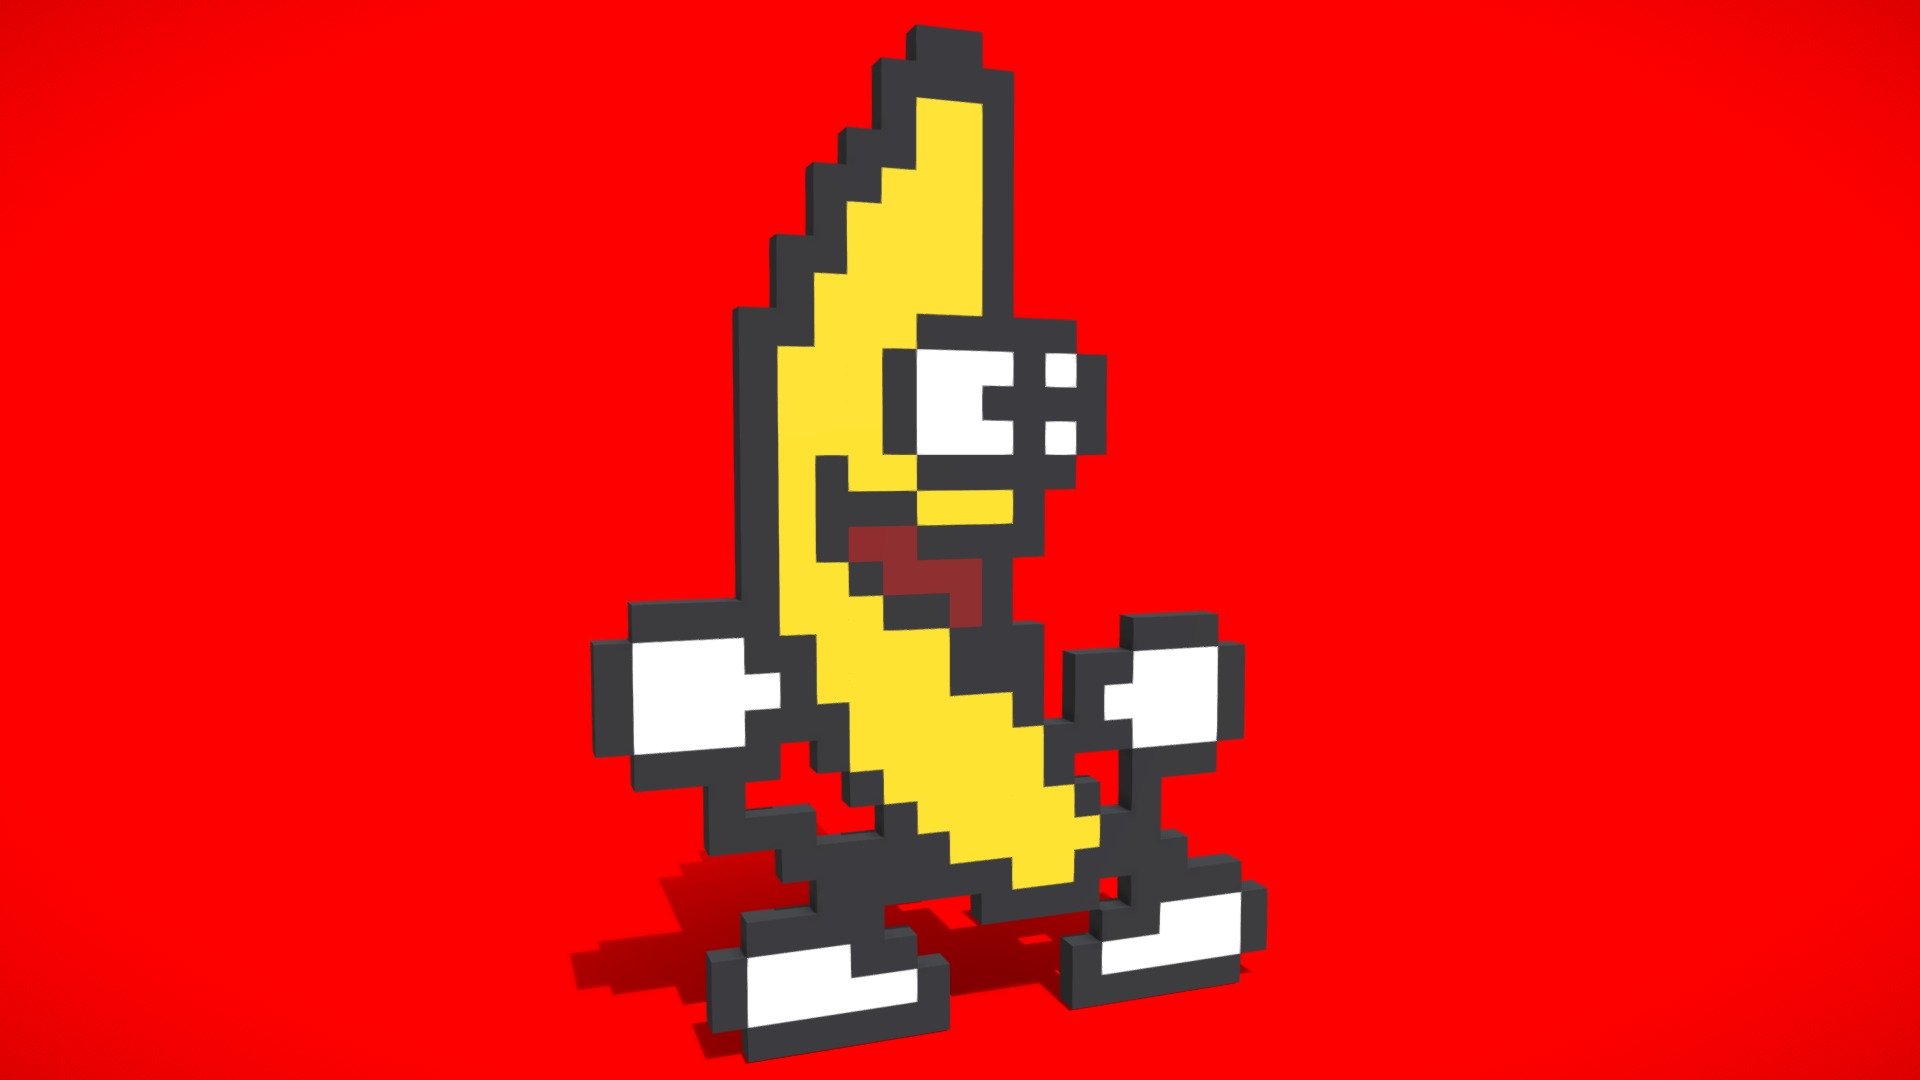 FREE ! 

I designed the most famous banana in the meme world

I designed the banana in Pixel Art style

Banana will be great in your games

I hope you like it - Banana - Download Free 3D model by Delo (@DevFaisal) 3d model